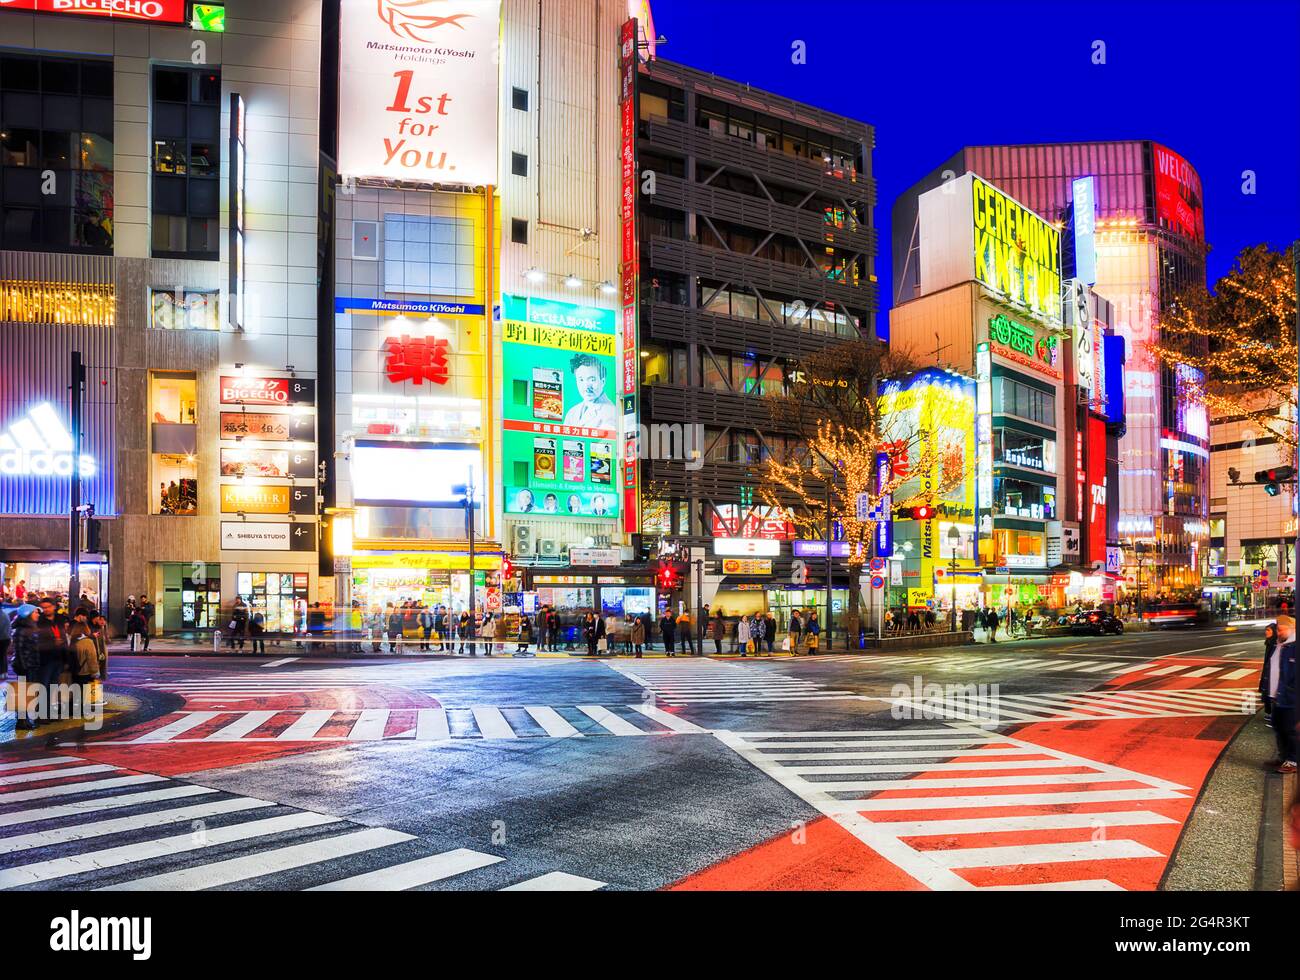 Tokyo, Japan - 31 Dec 2019: Famous Shibuya crossing urban streets intersection at sunset with bright ad lights. Stock Photo